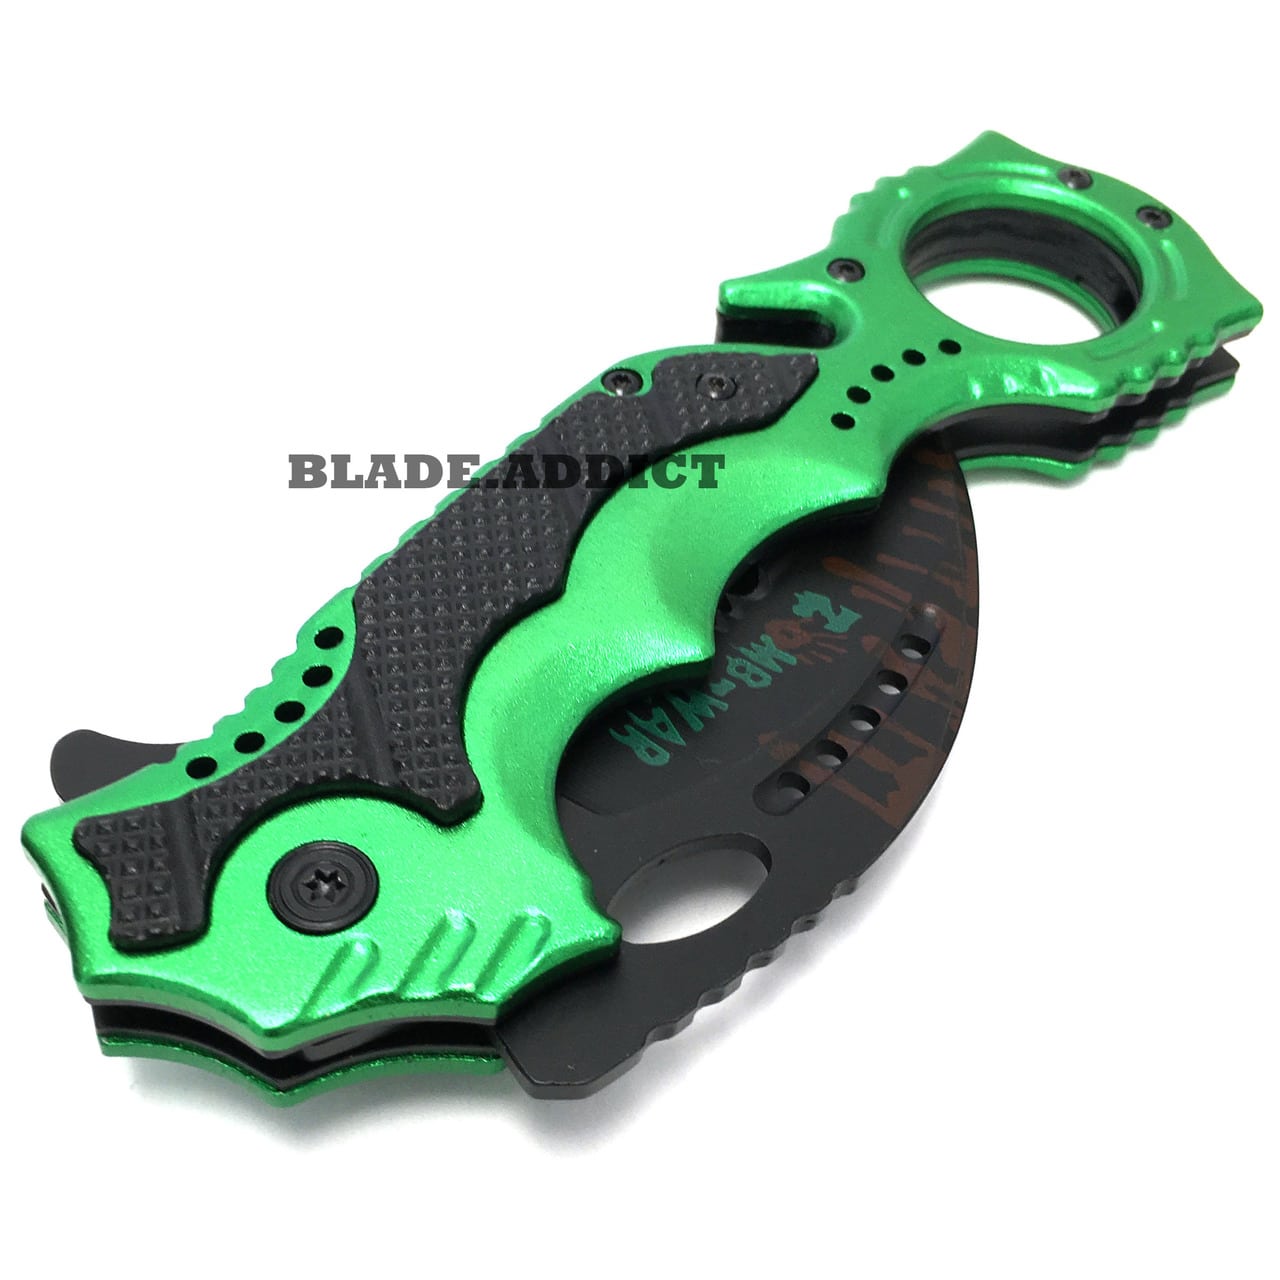 8" ZOMBIE KARAMBIT Tactical Claw Spring Assisted Pocket Knife Rescue Combat EDC